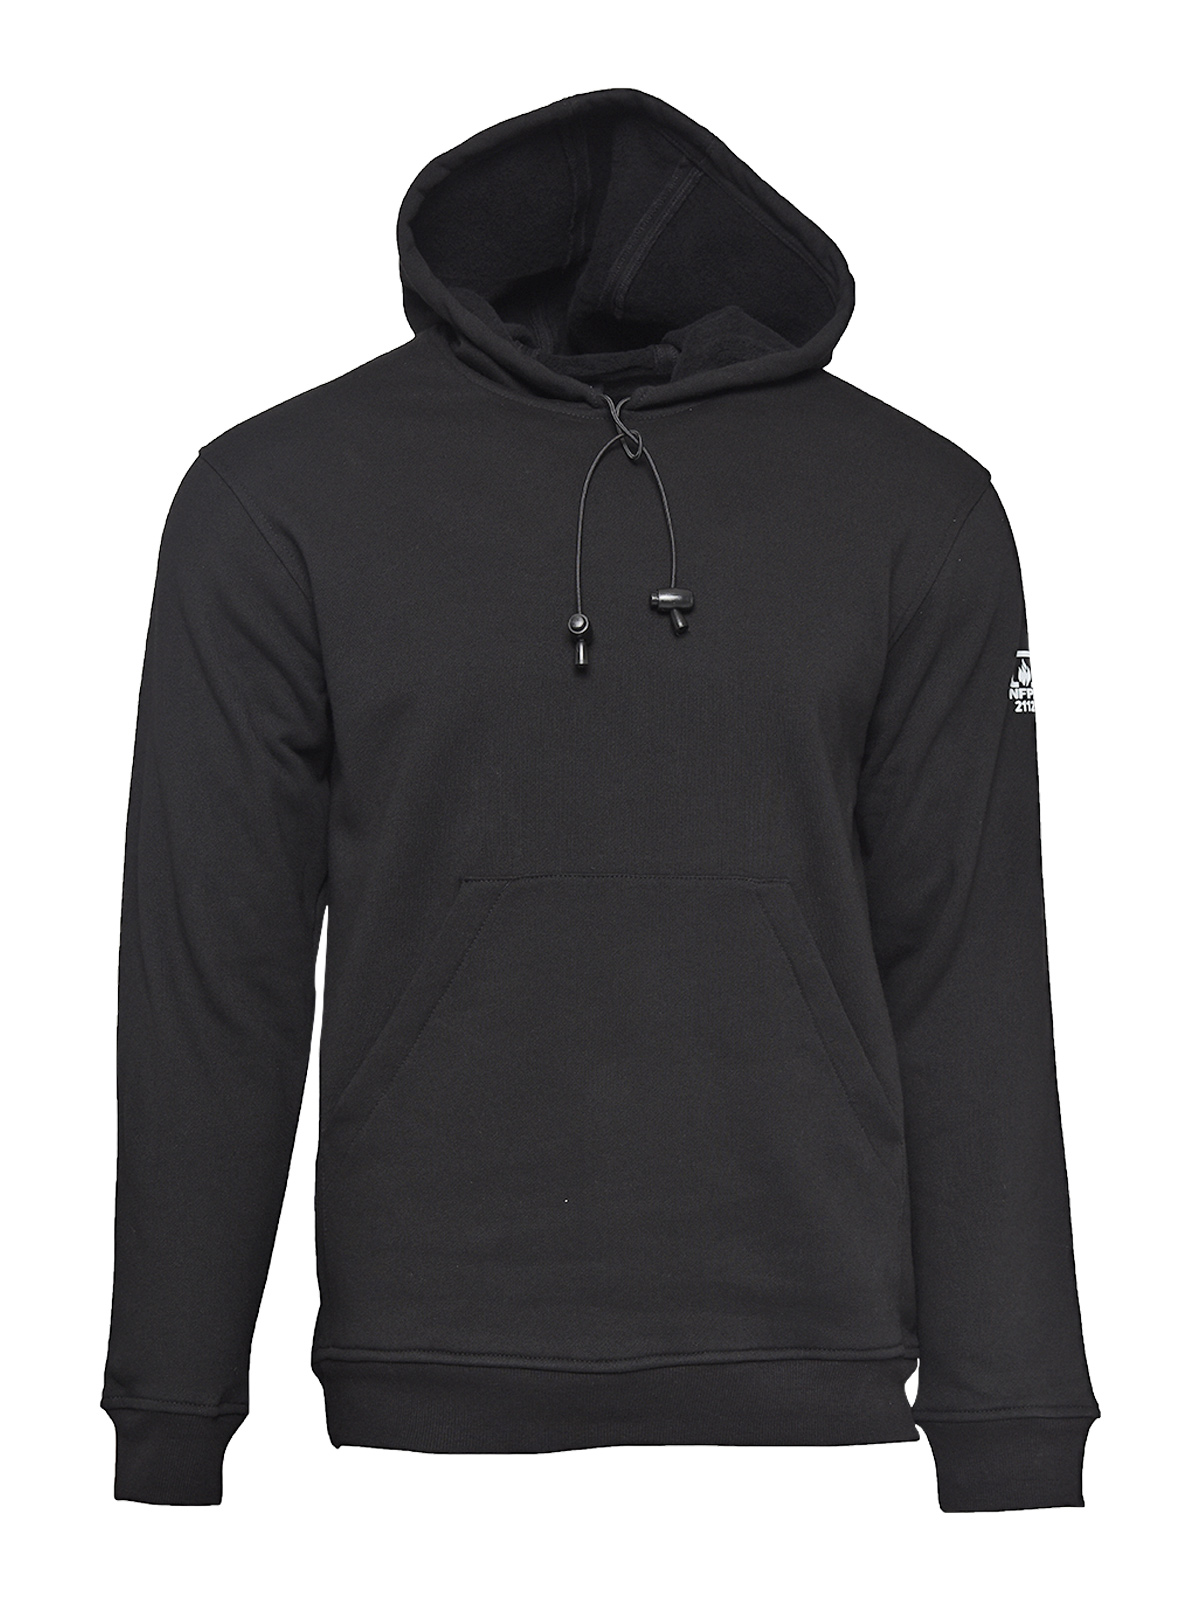 FR Sweaters | Best Fire Resistant Hoodies & Pullovers | From Tarasafe